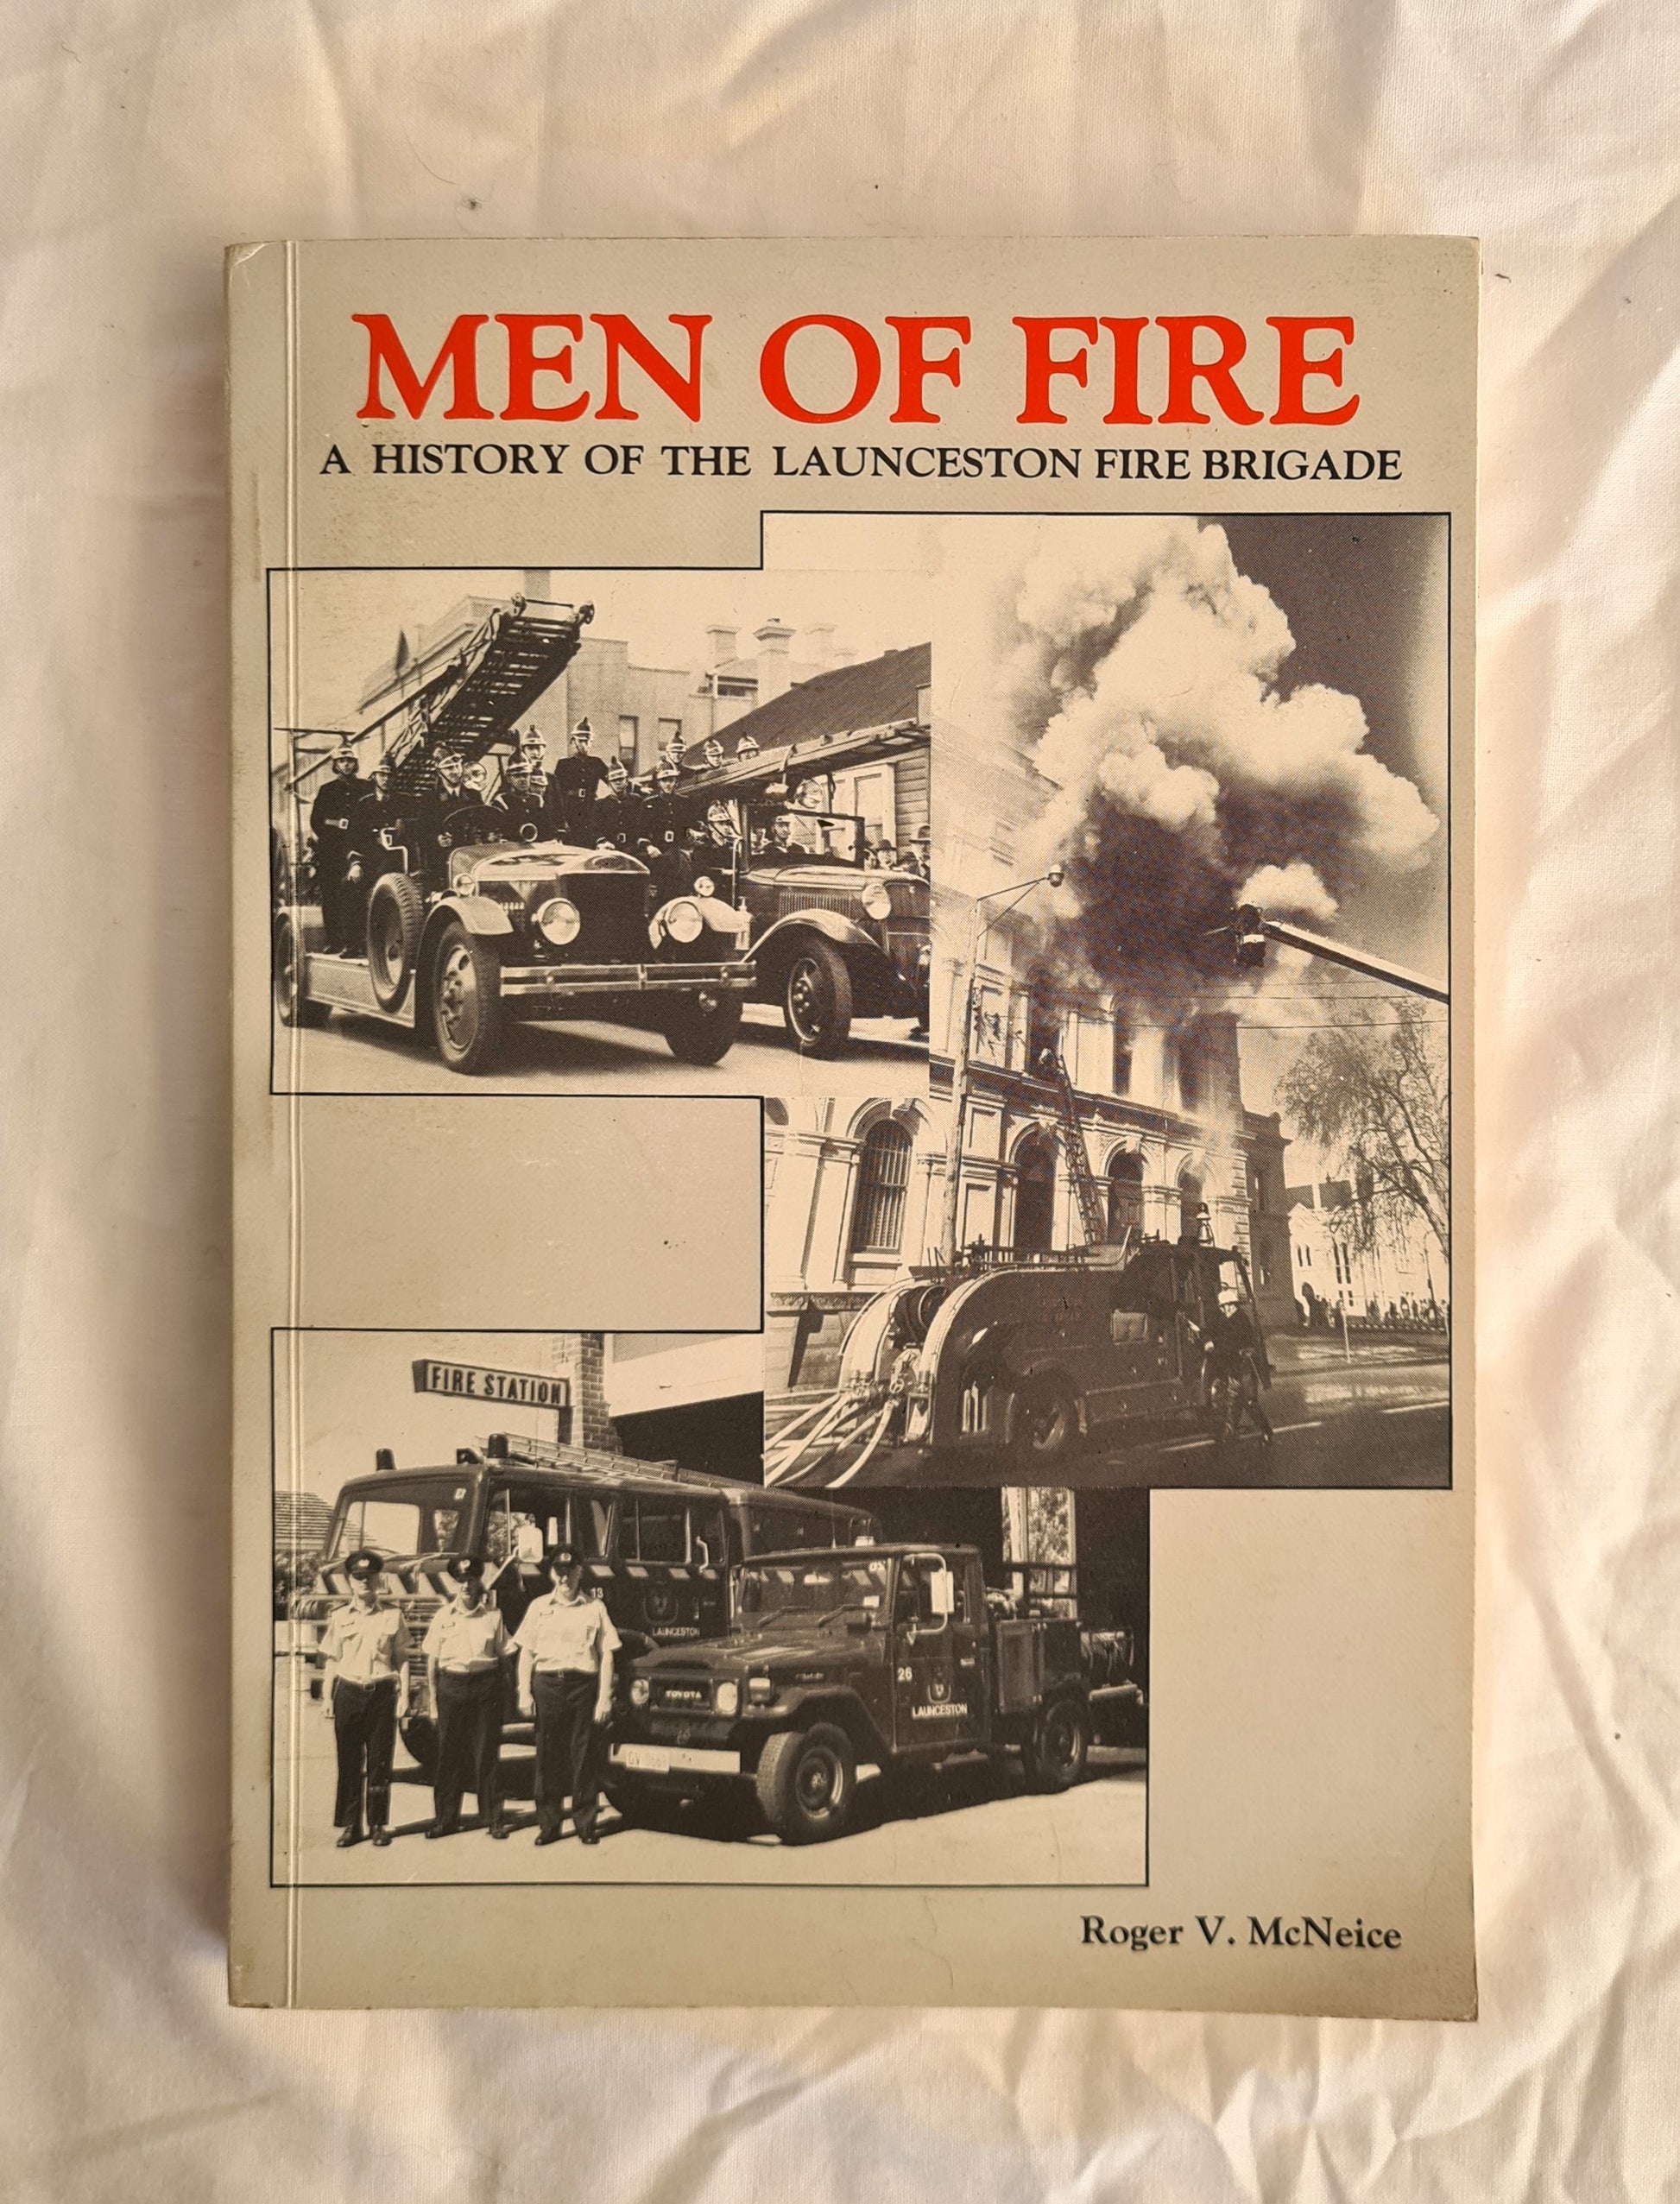 Men of Fire  A History of the Launceston Fire Brigade  by Roger V. McNeice